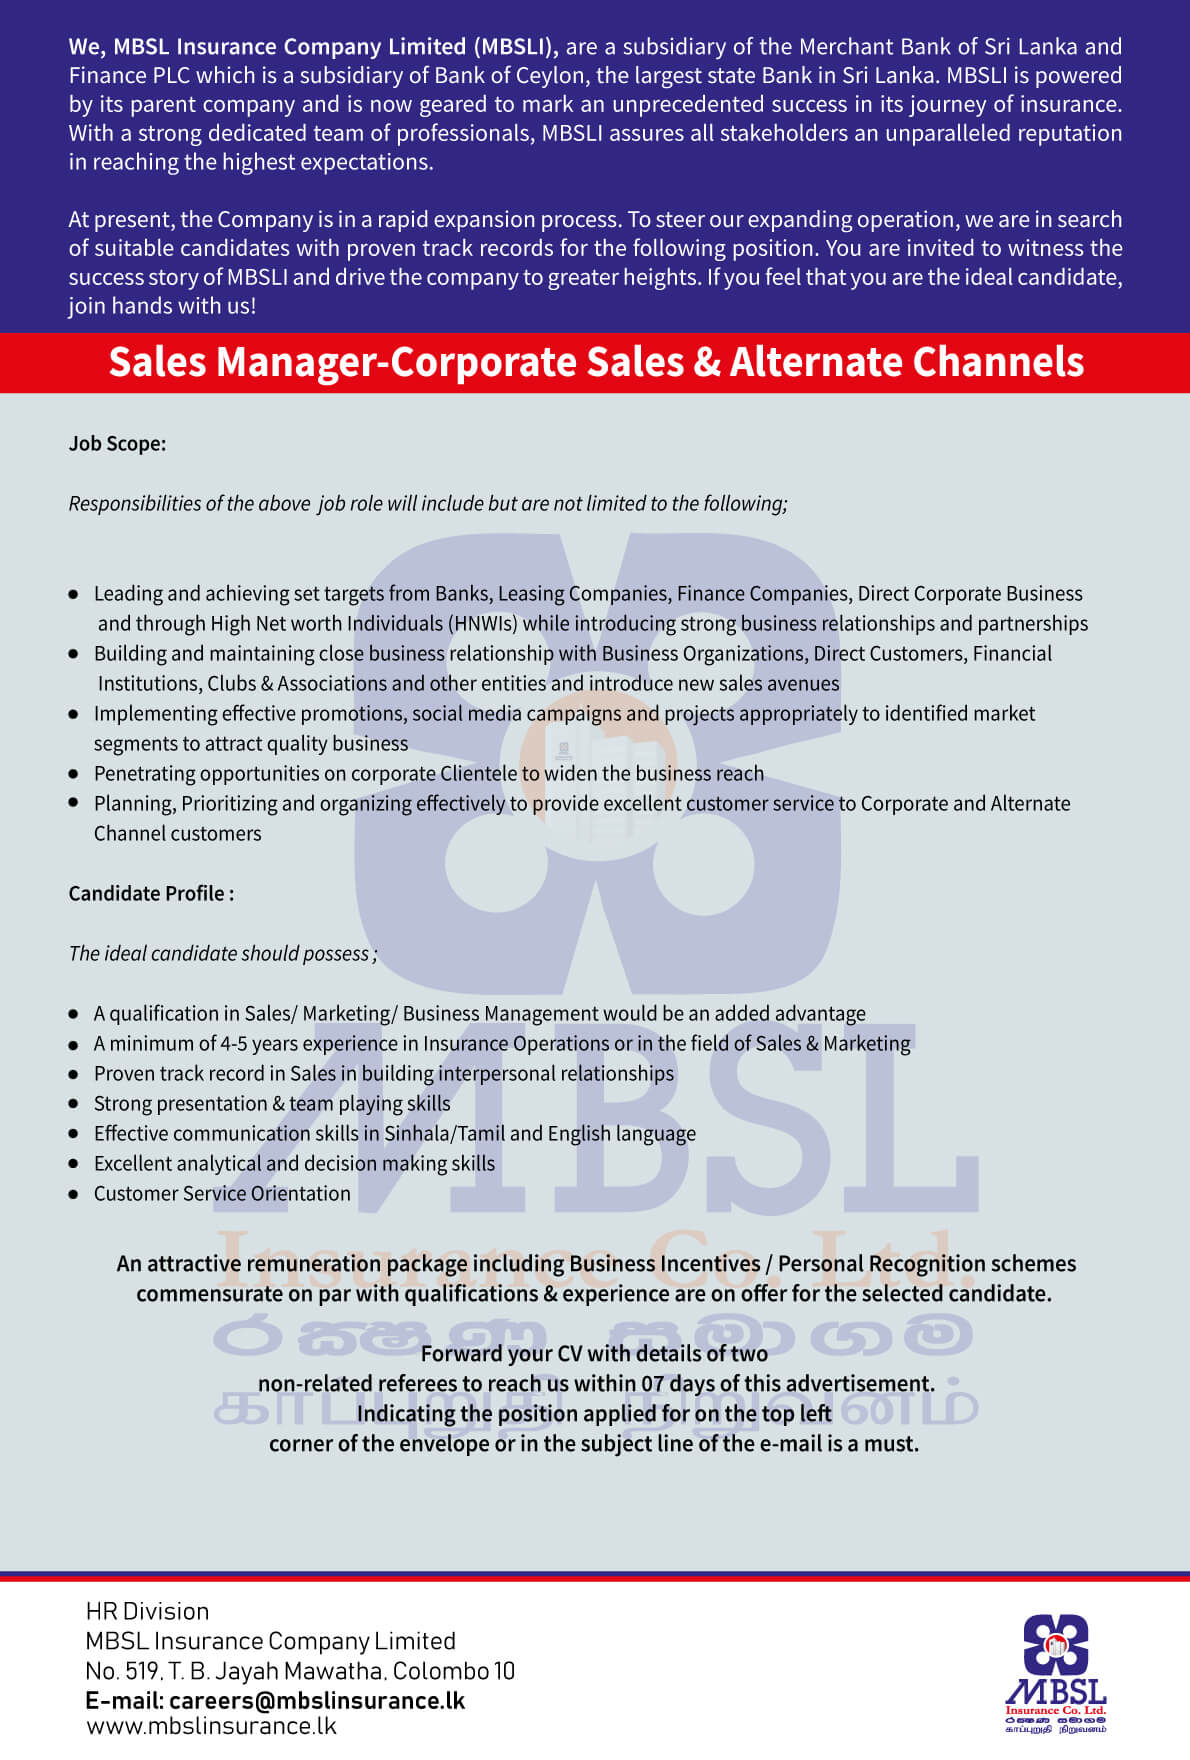 Sales-Manager-Corporate-Sales-Alternate-Channels